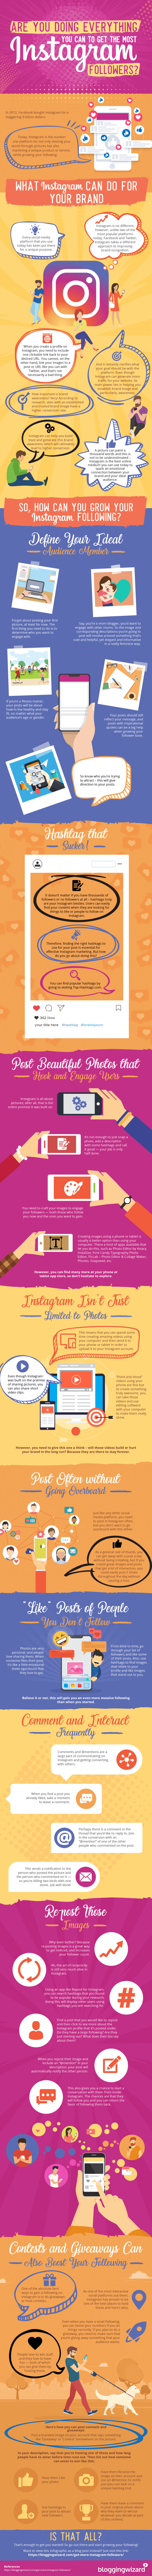 guide-for-growing-instagram-followers